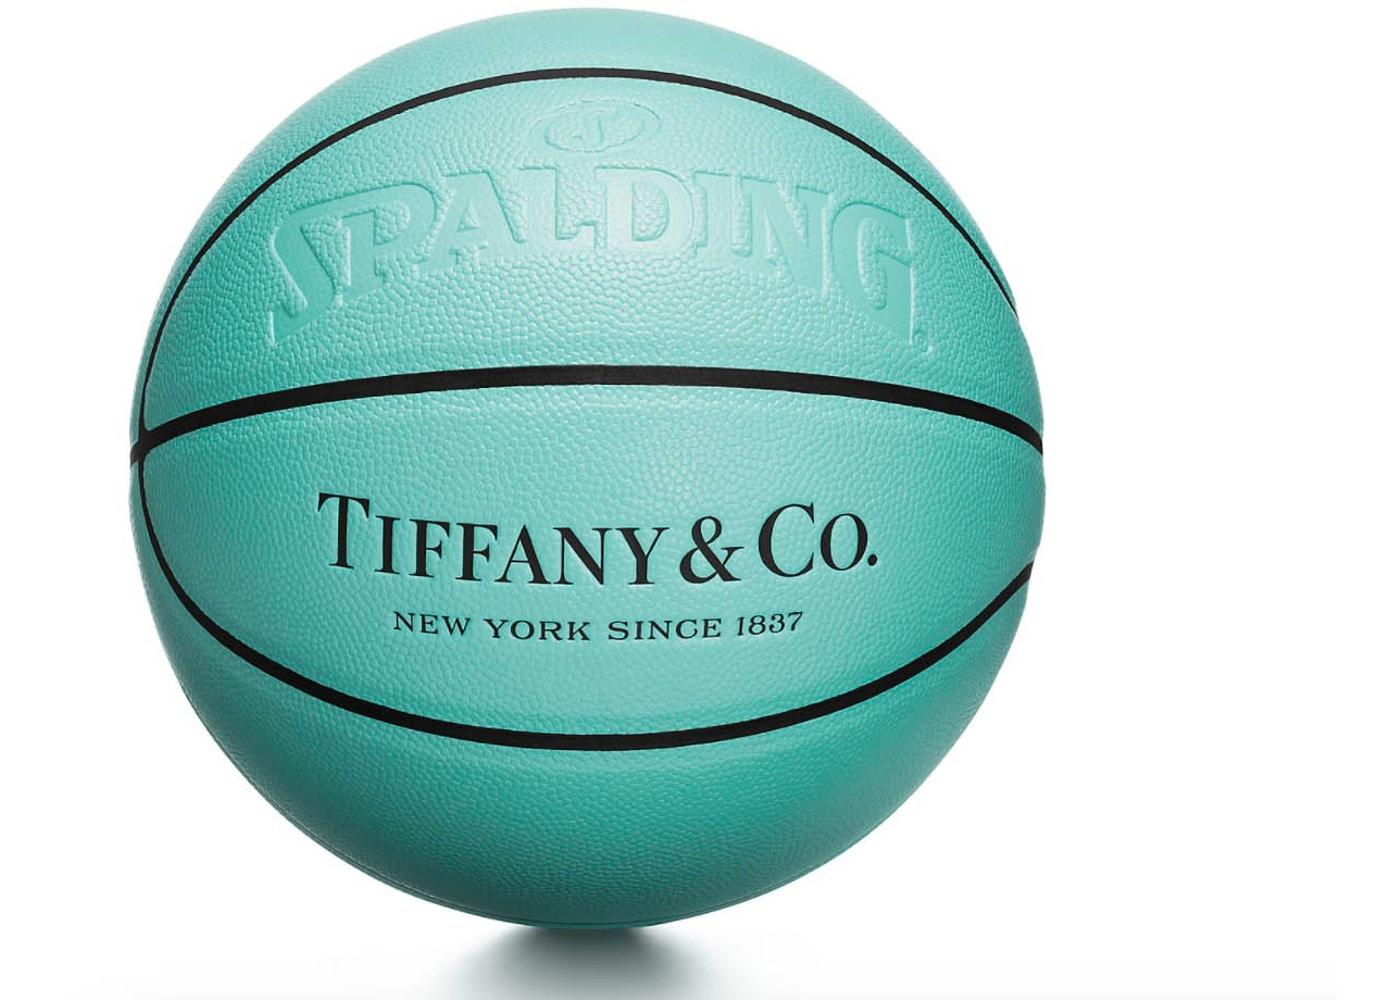 The Tiffany & Co. x Spalding Basketball collaboration was originally released in December 2019 selling out very quickly.

The piece, a regulation size basketball (standard size 7: 29.5 inches), features "Tiffany & Co. New York since 1837" on the